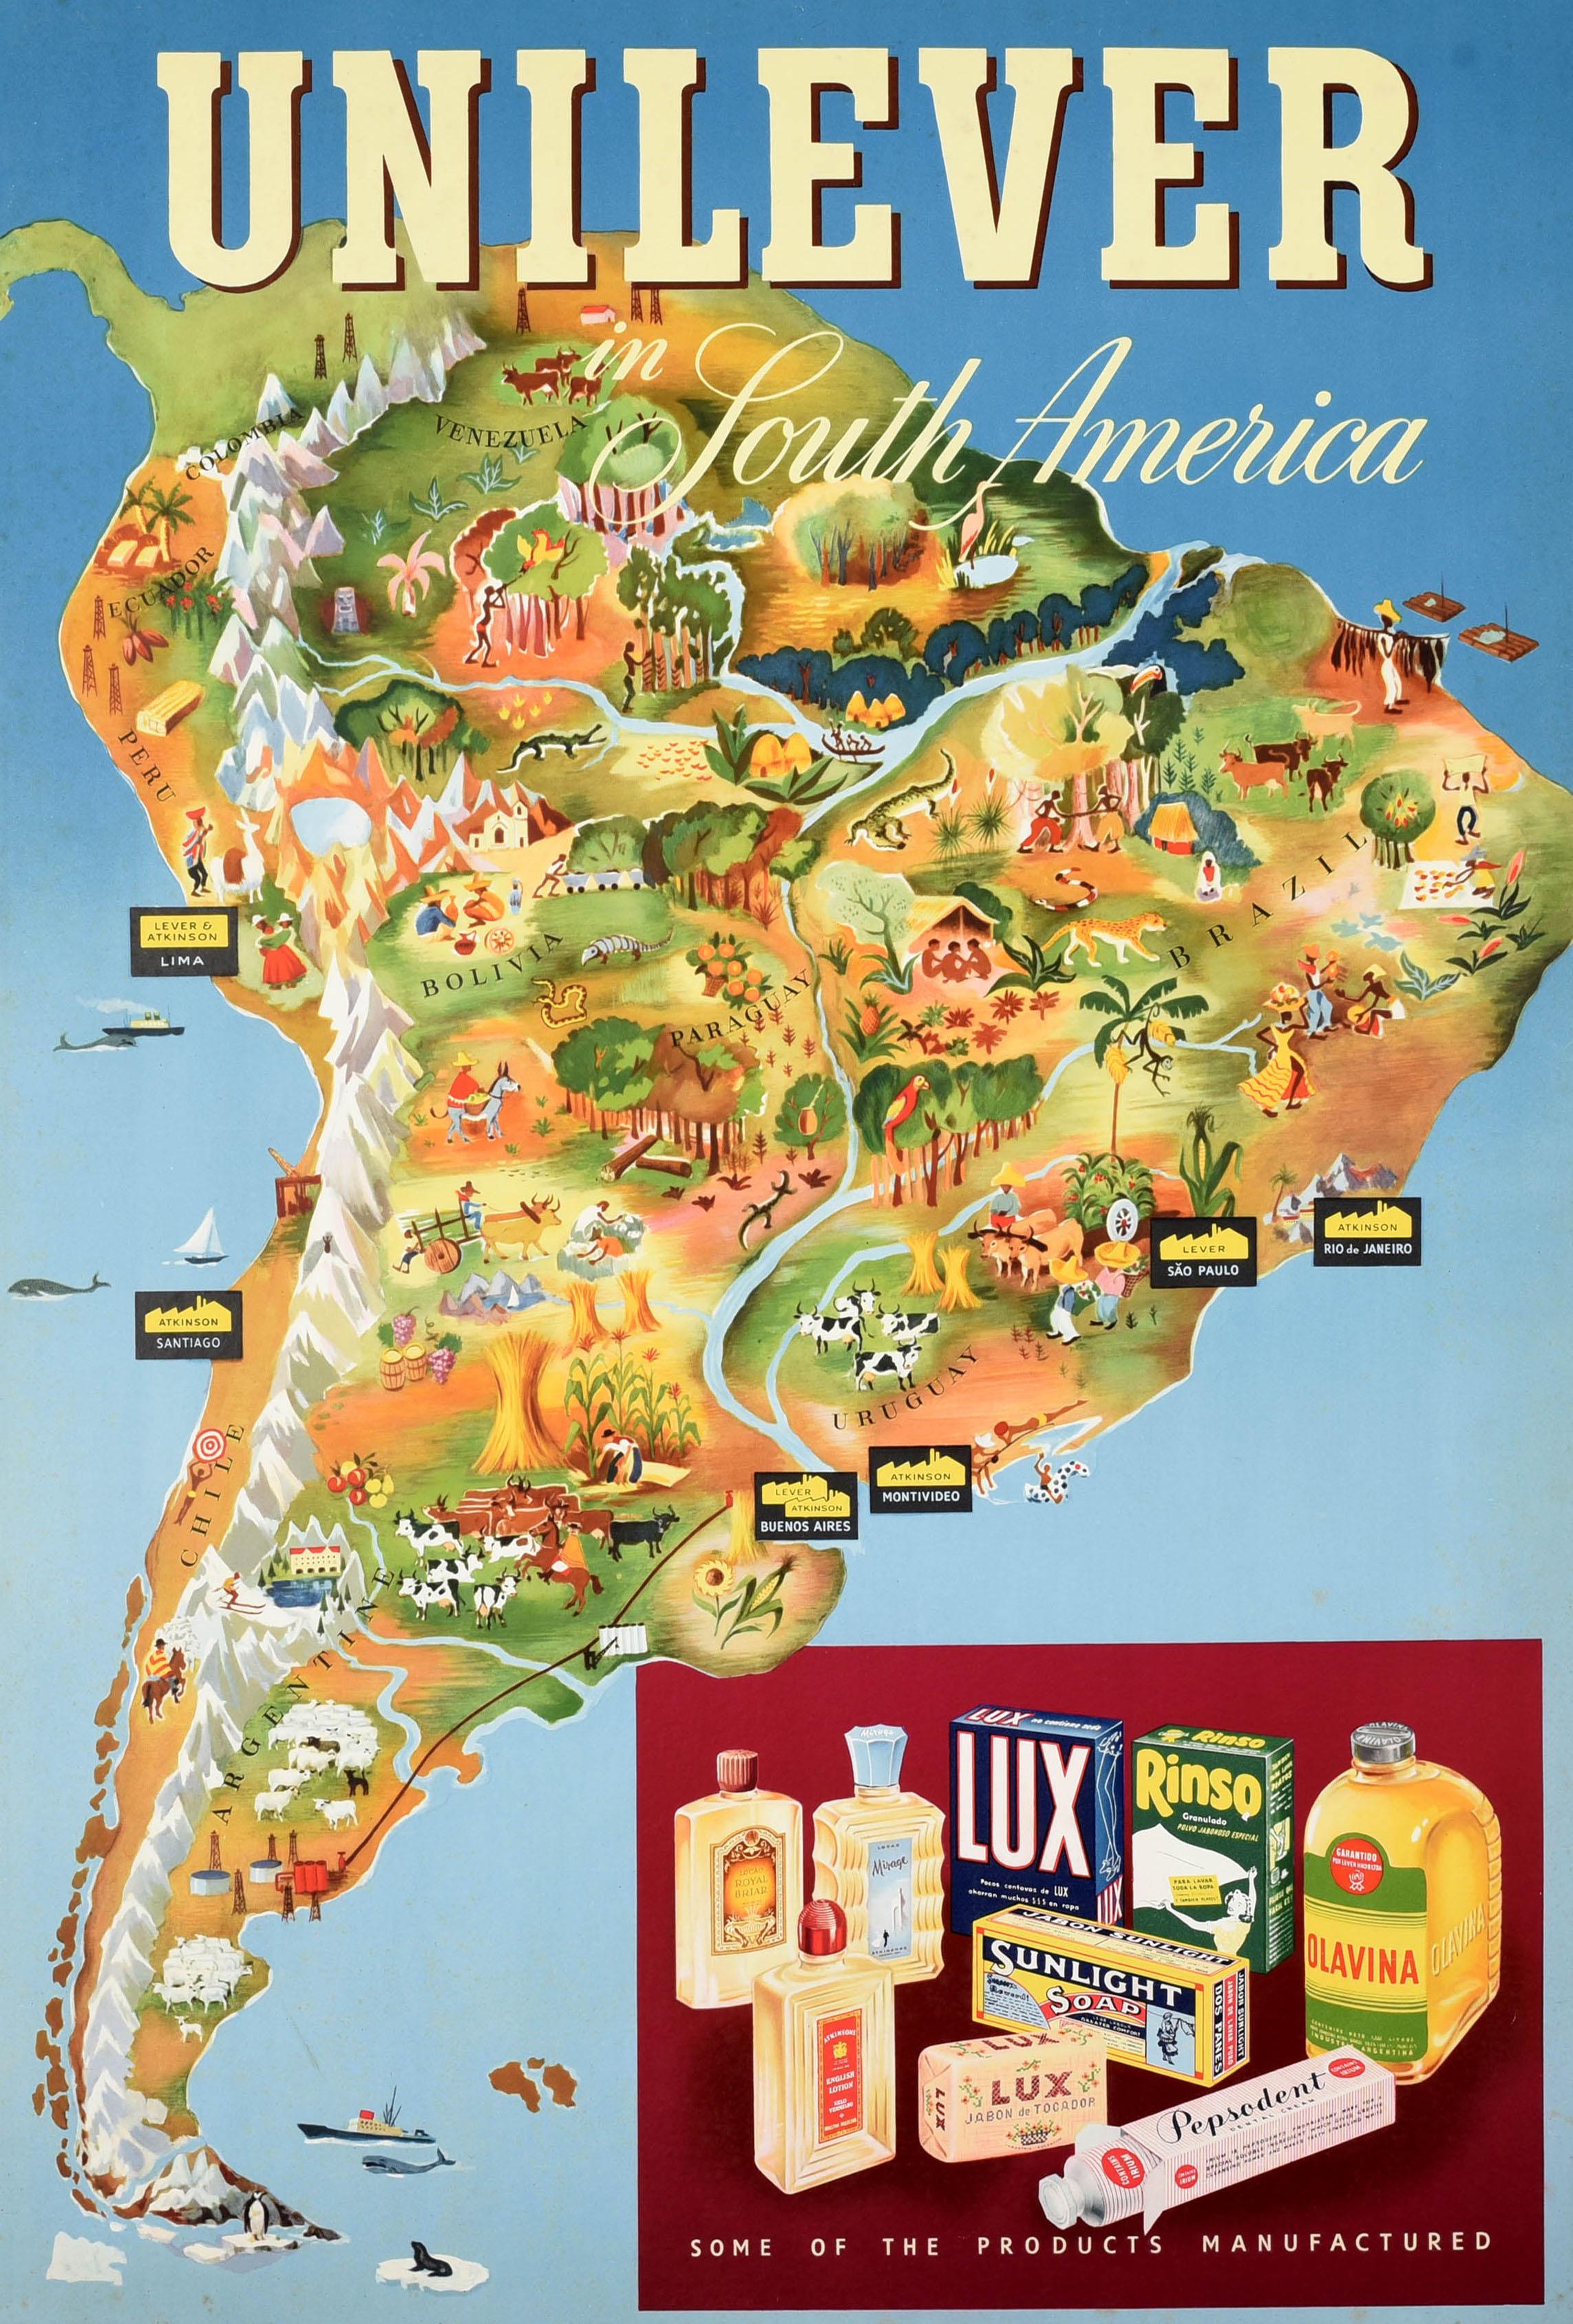 Original Vintage Advertising Poster Unilever South America Illustrated Map Art - Print by Unknown